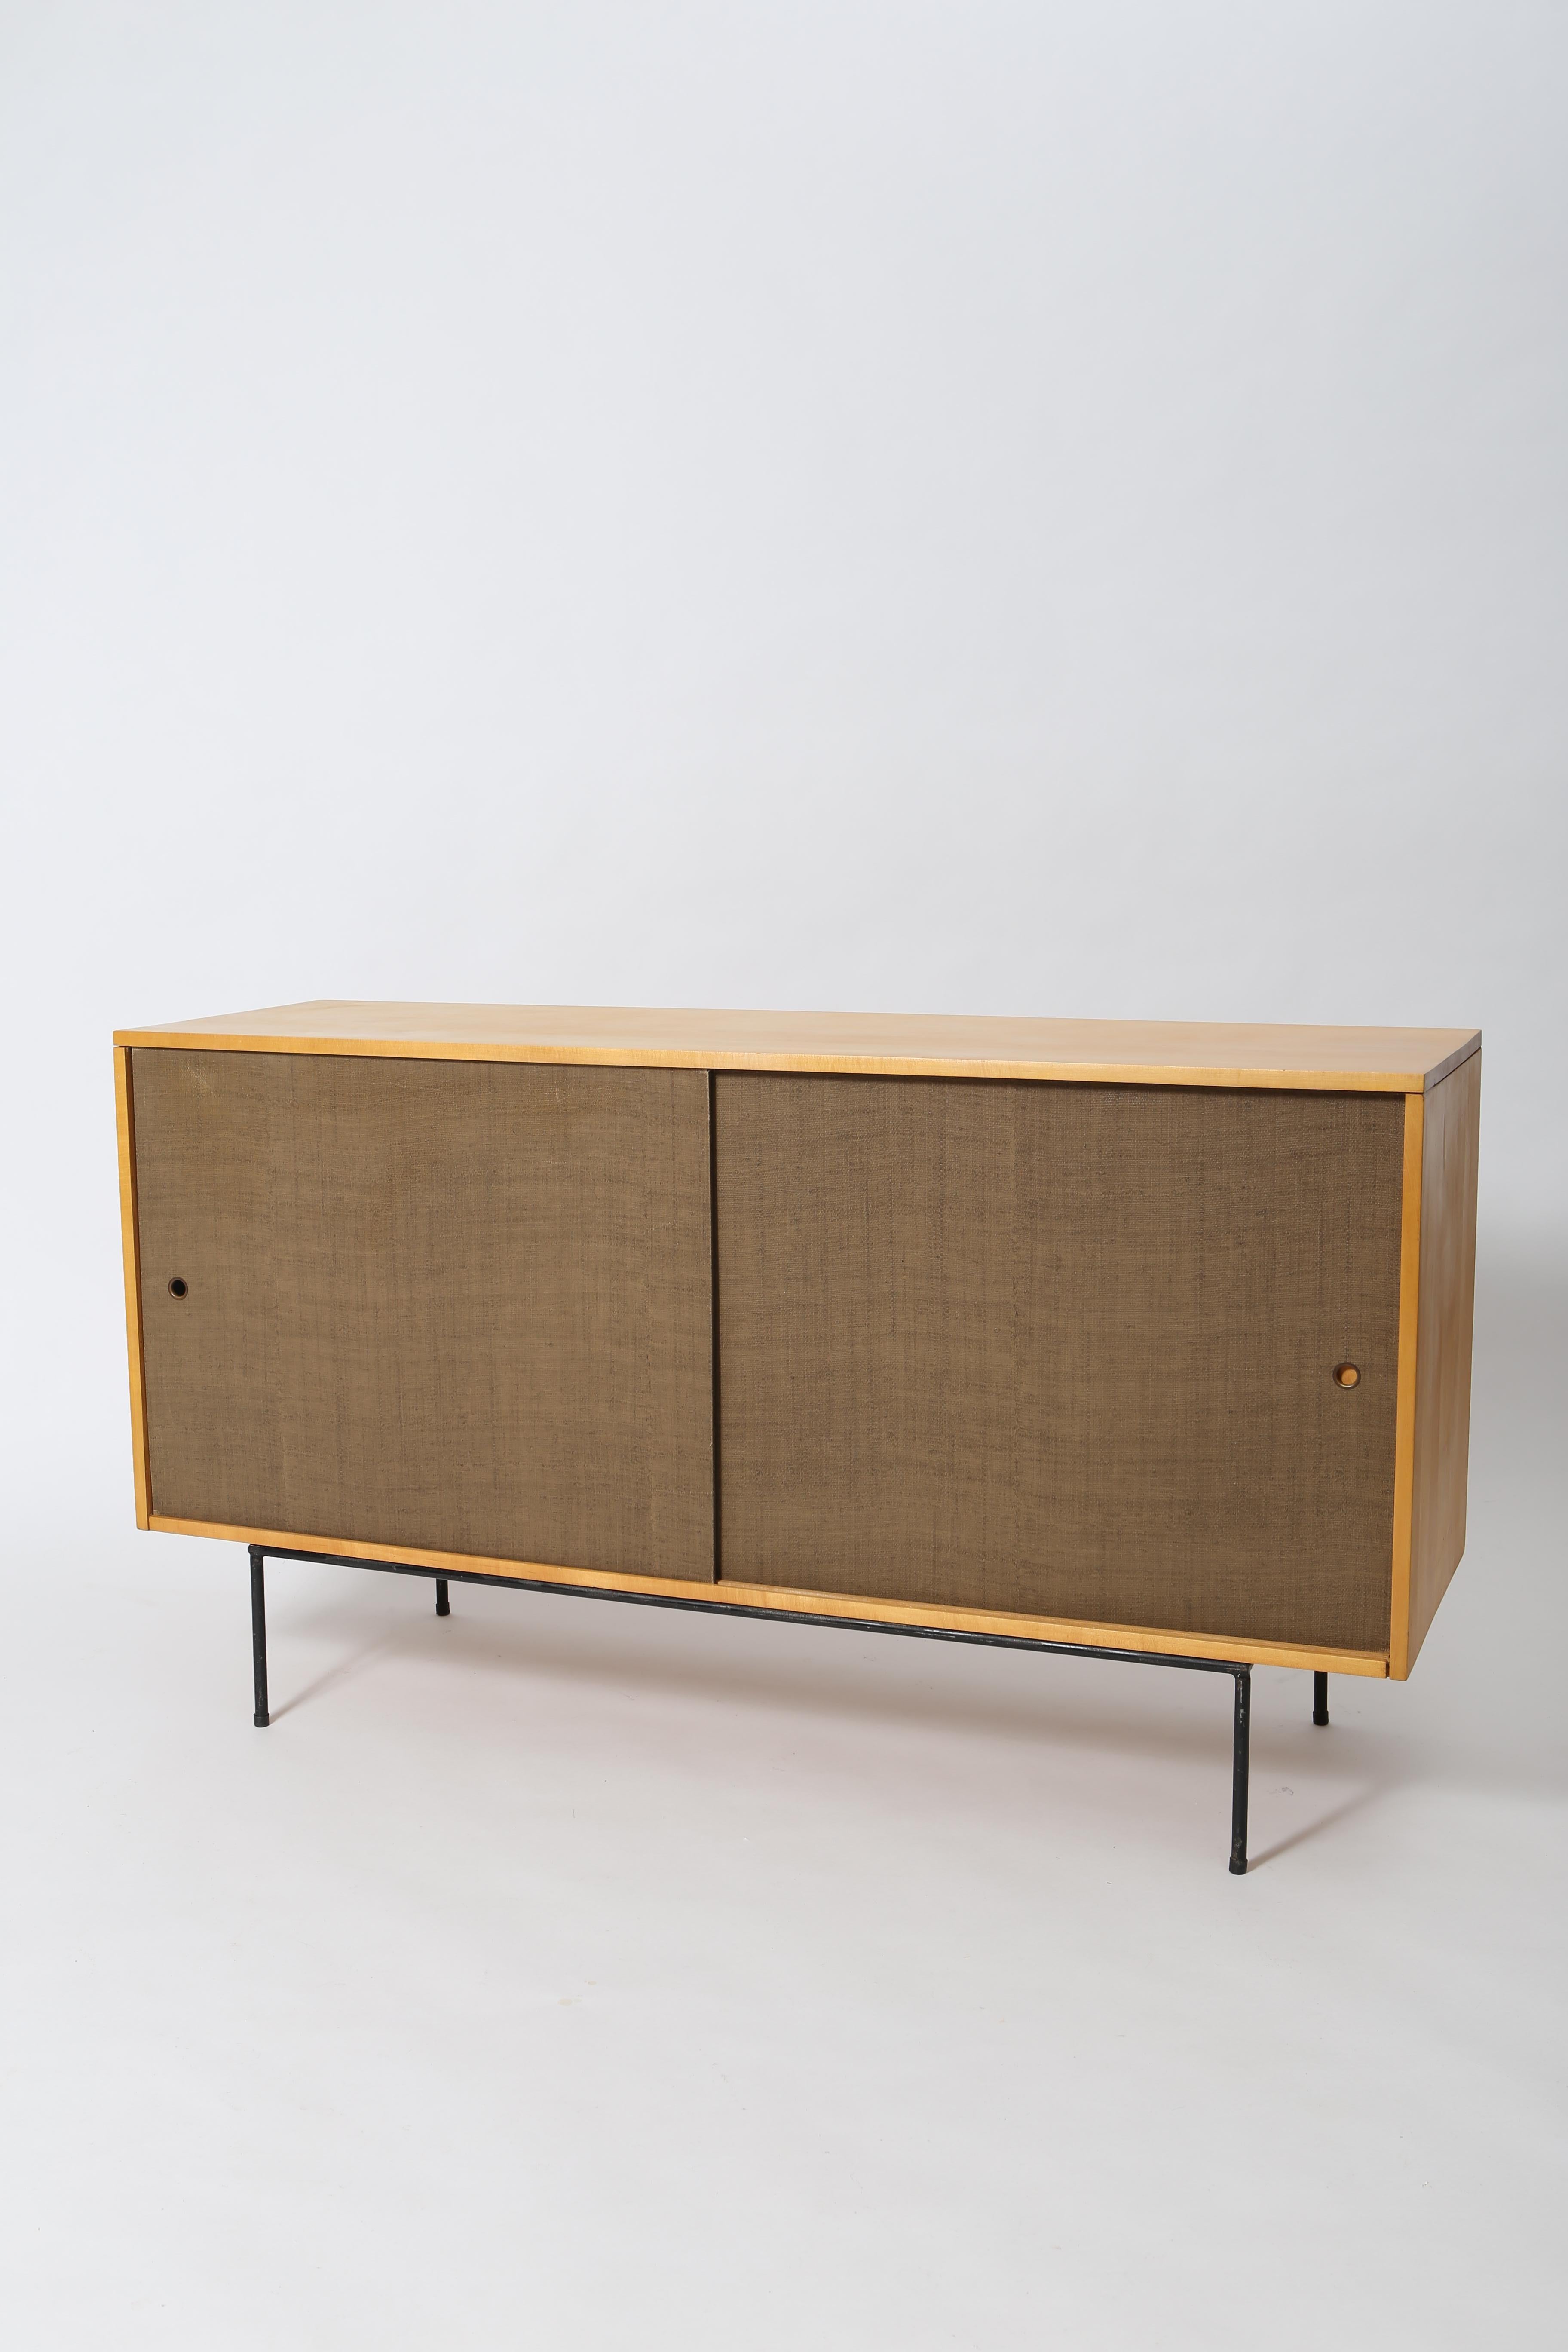 American Modernist Maple & Grasscloth cabinet by Paul McCobb